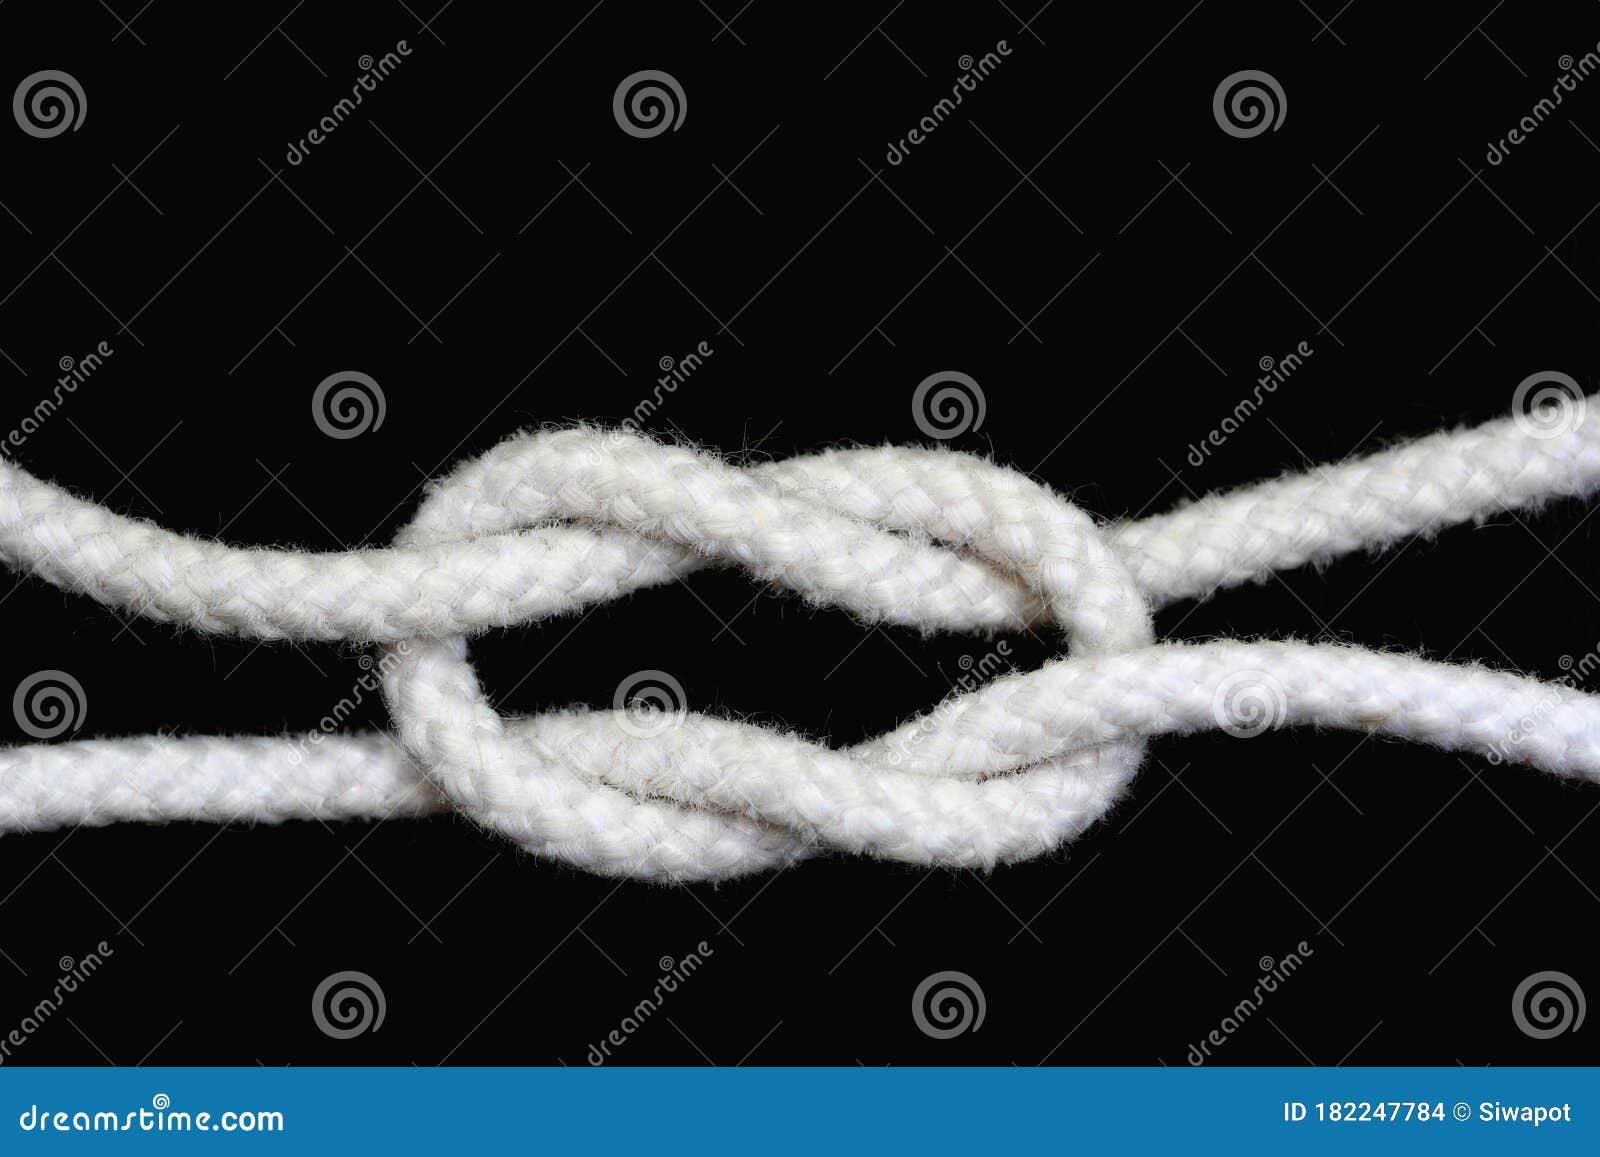 3,357 Black White Rope Knot Stock Photos - Free & Royalty-Free Stock Photos  from Dreamstime